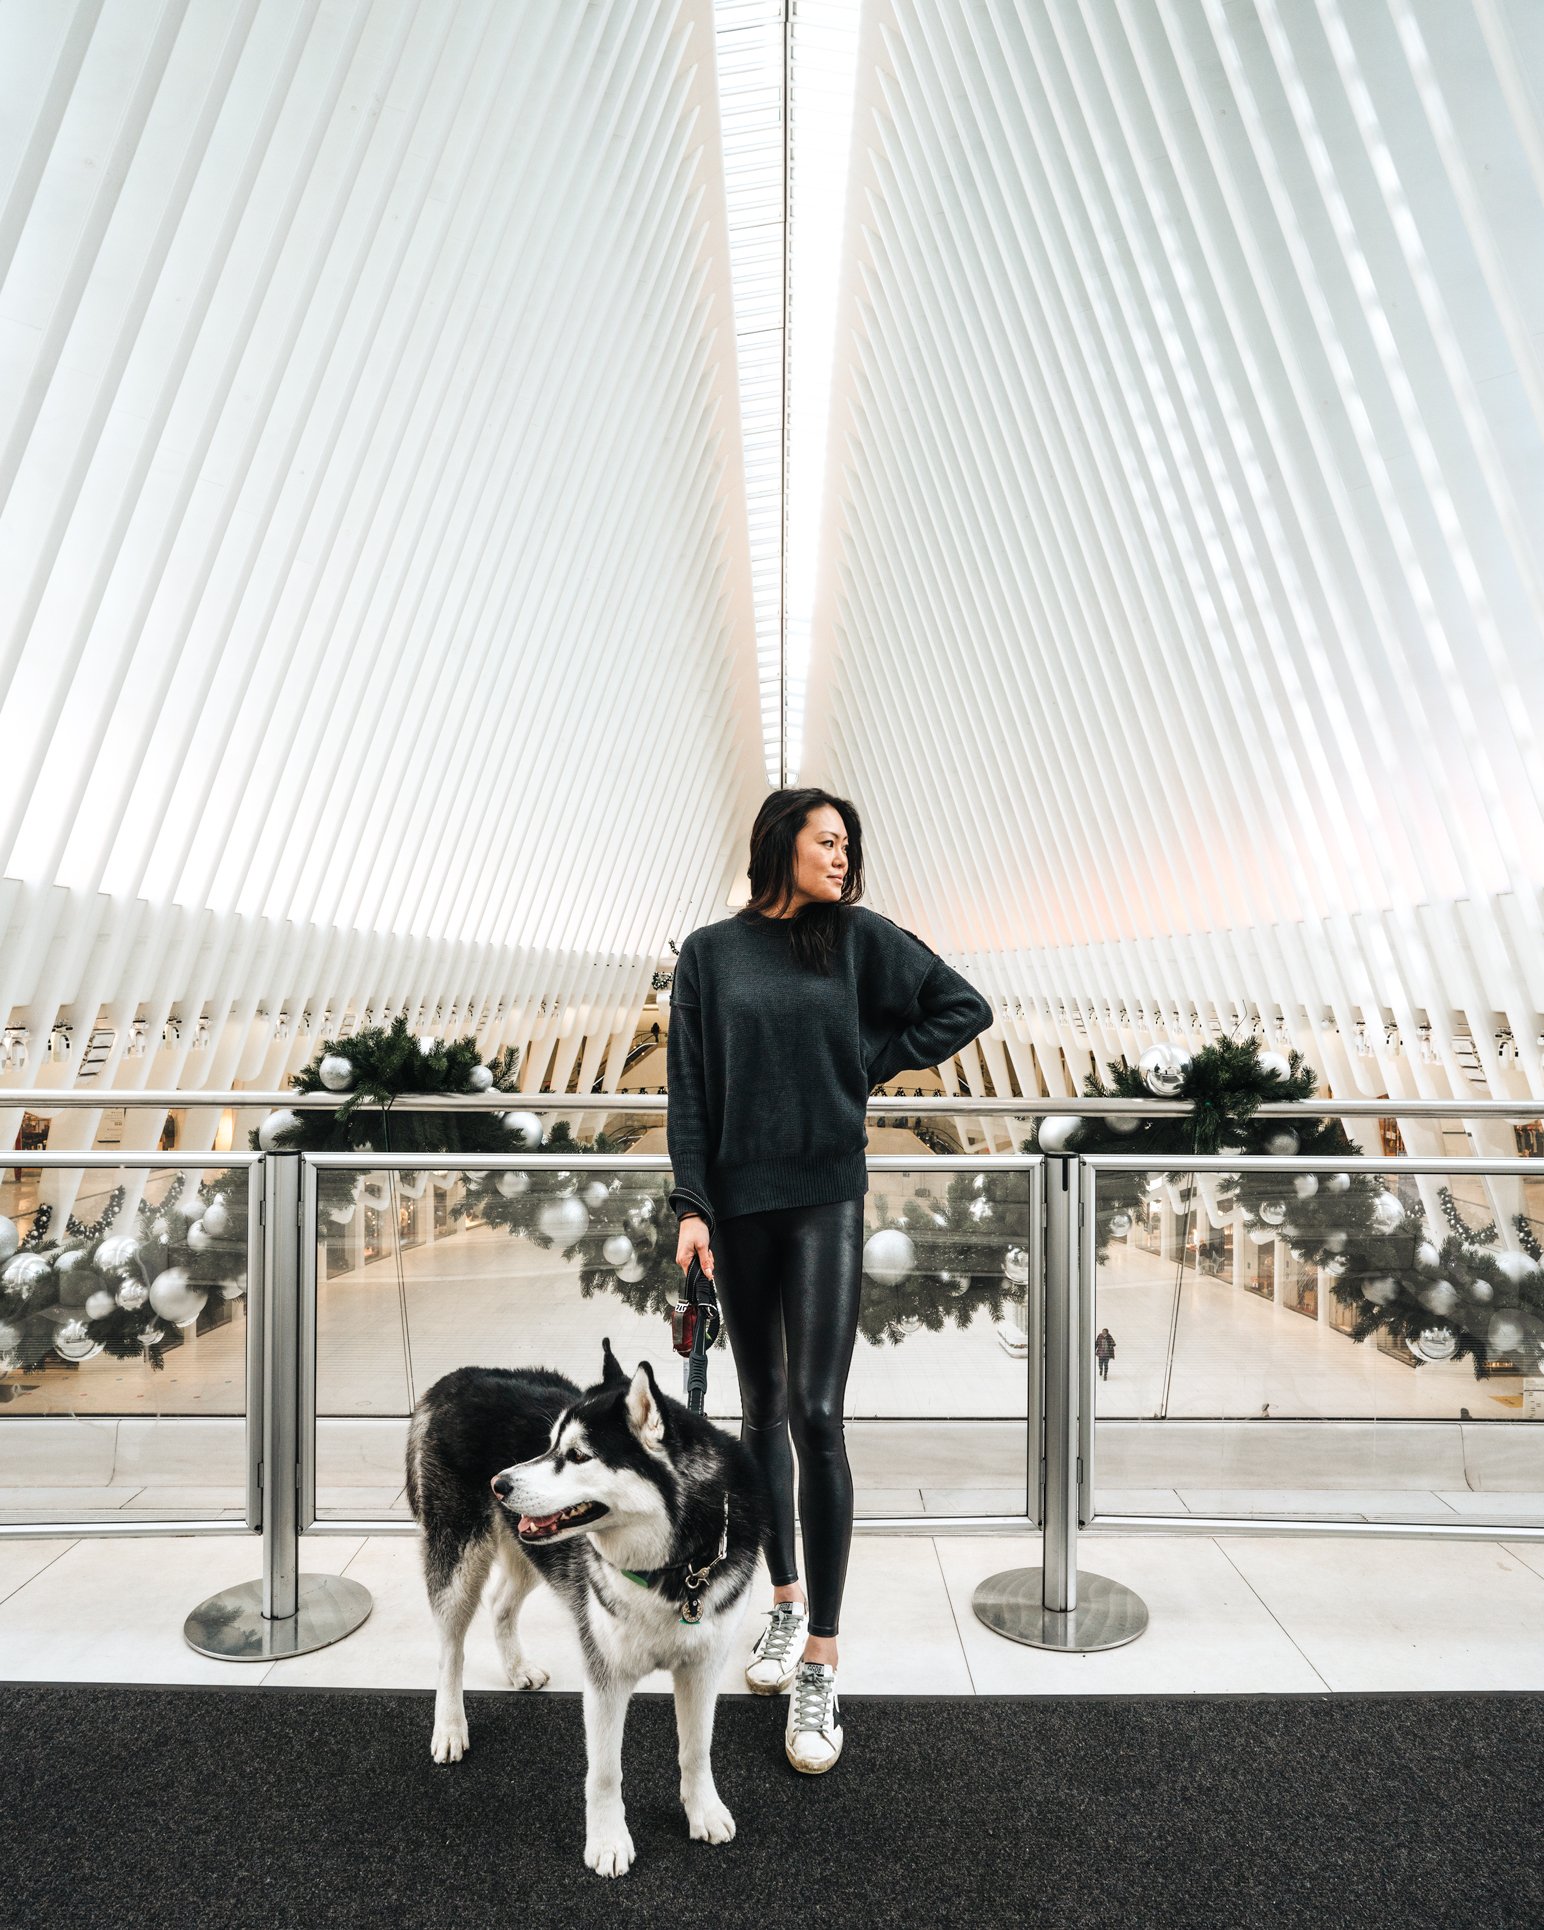 SIBE LIFE | Elaine & Gatsby standing inside of the Oculus